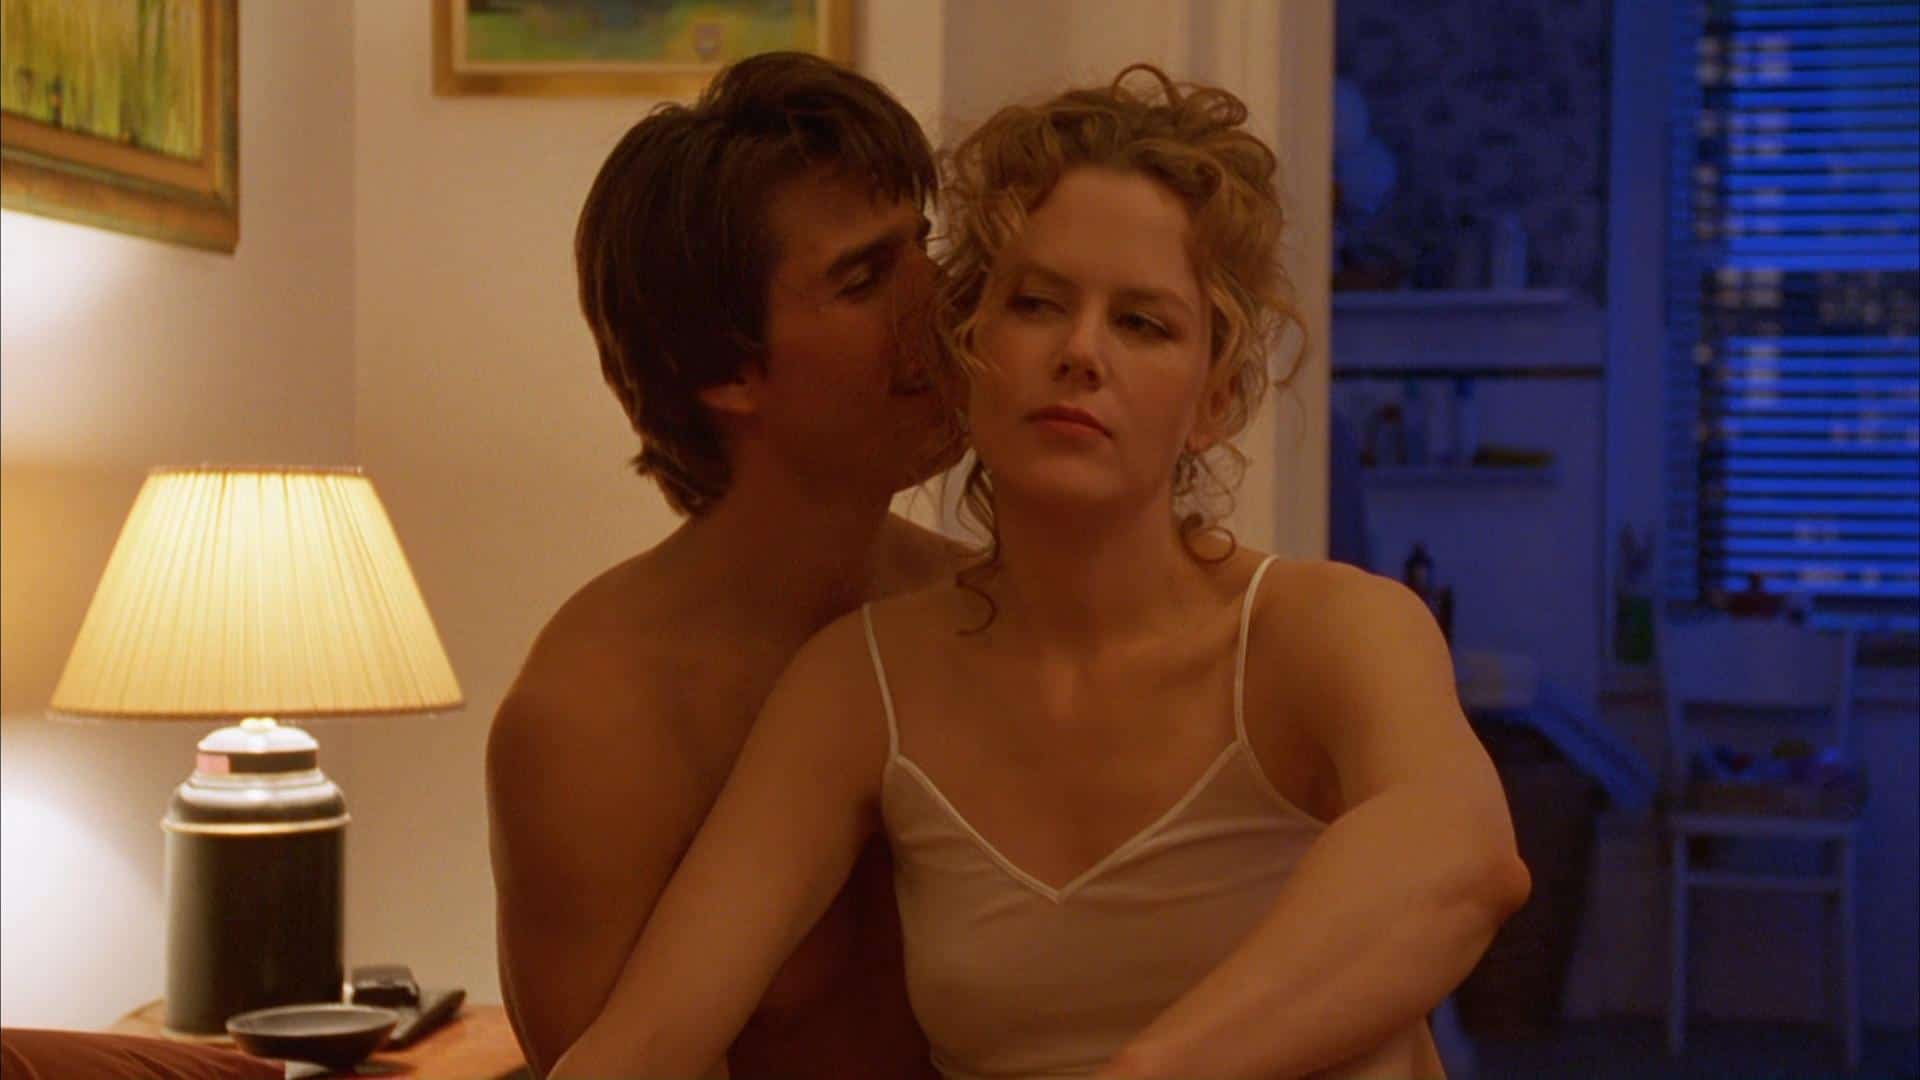 The Dream State of 'Eyes Wide Shut'